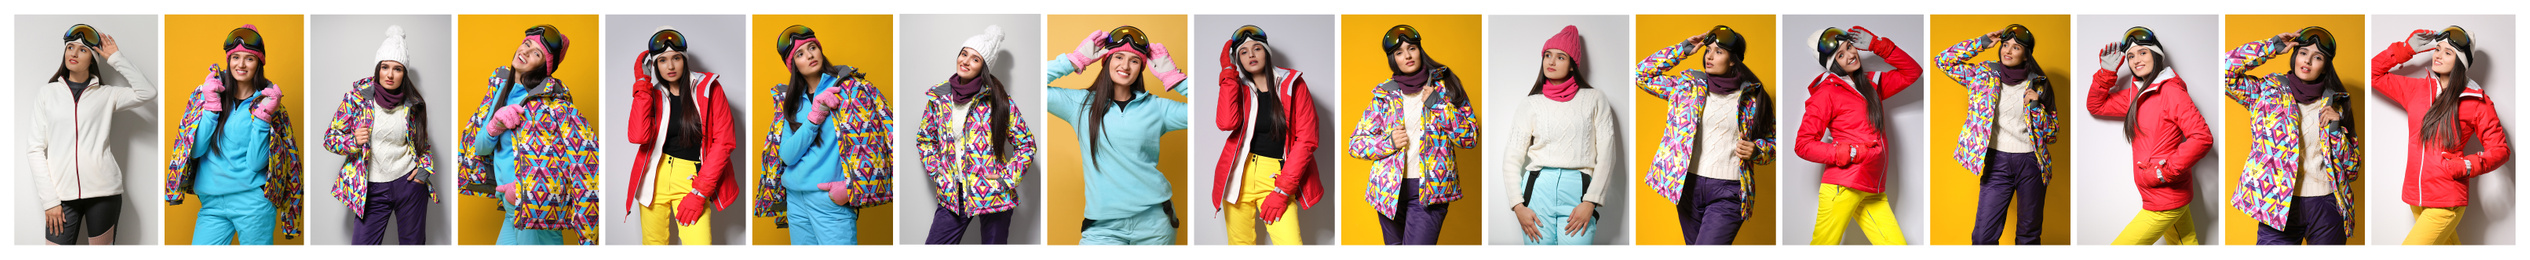 Collage of people wearing winter sports clothes on color backgrounds. Banner design 